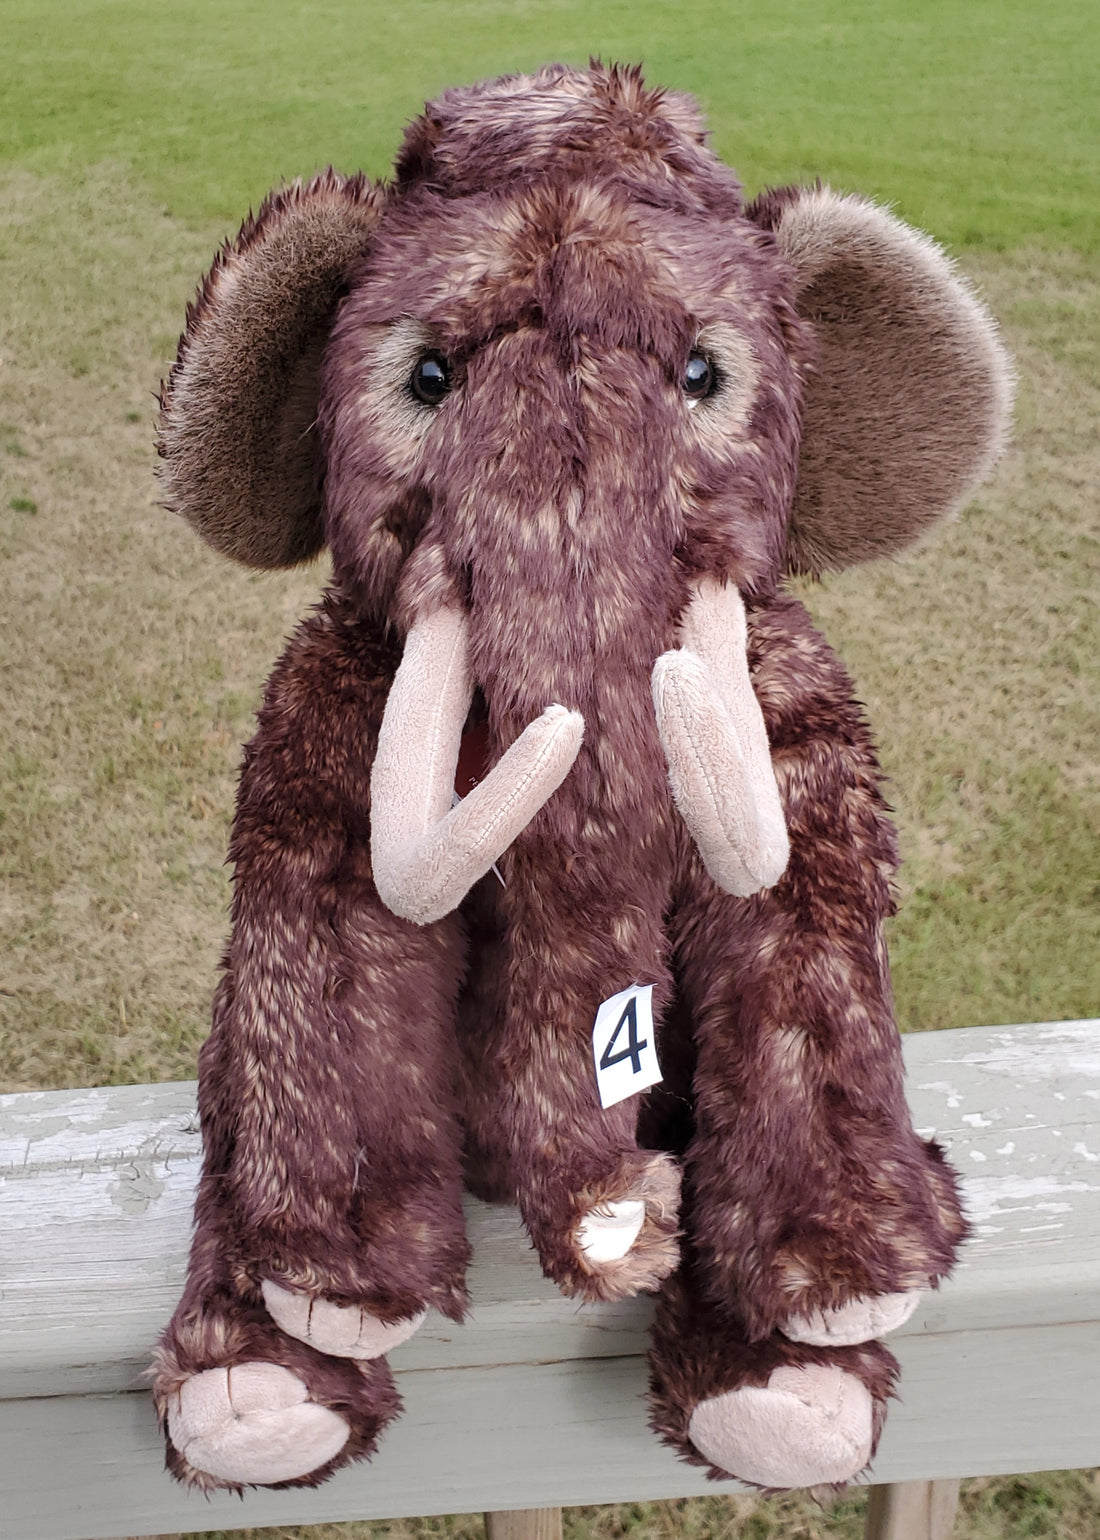 Mighty - 15.5" Woolly Mammoth Non-Jointed by Charlie Bears